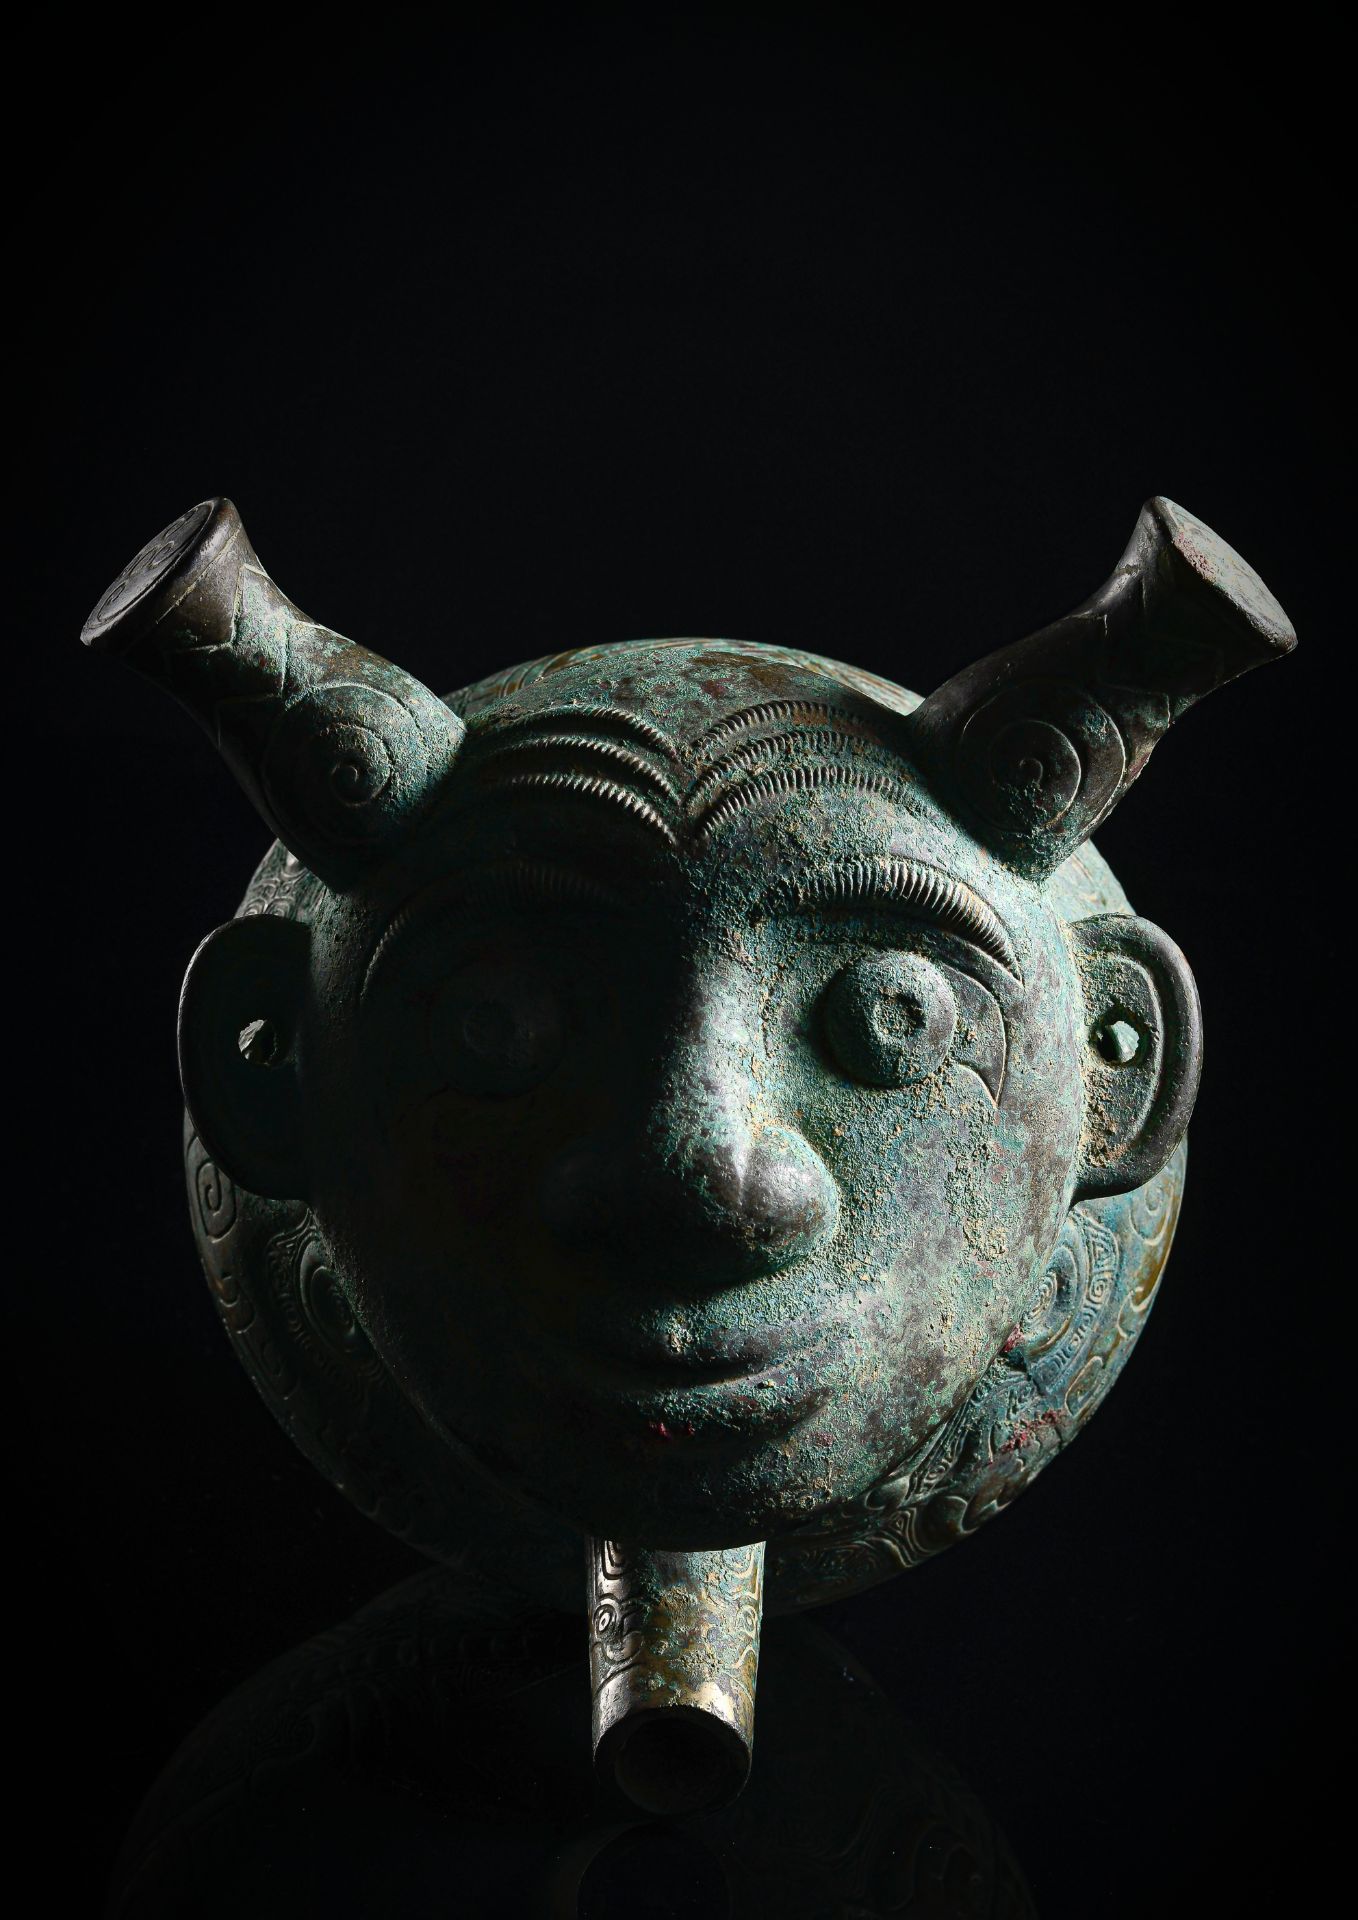 AN ARCHAIC RITUAL BRONZE WATER VESSEL 'HE' WITH AN ANTHROPOMORPHIC COVER - Image 3 of 3